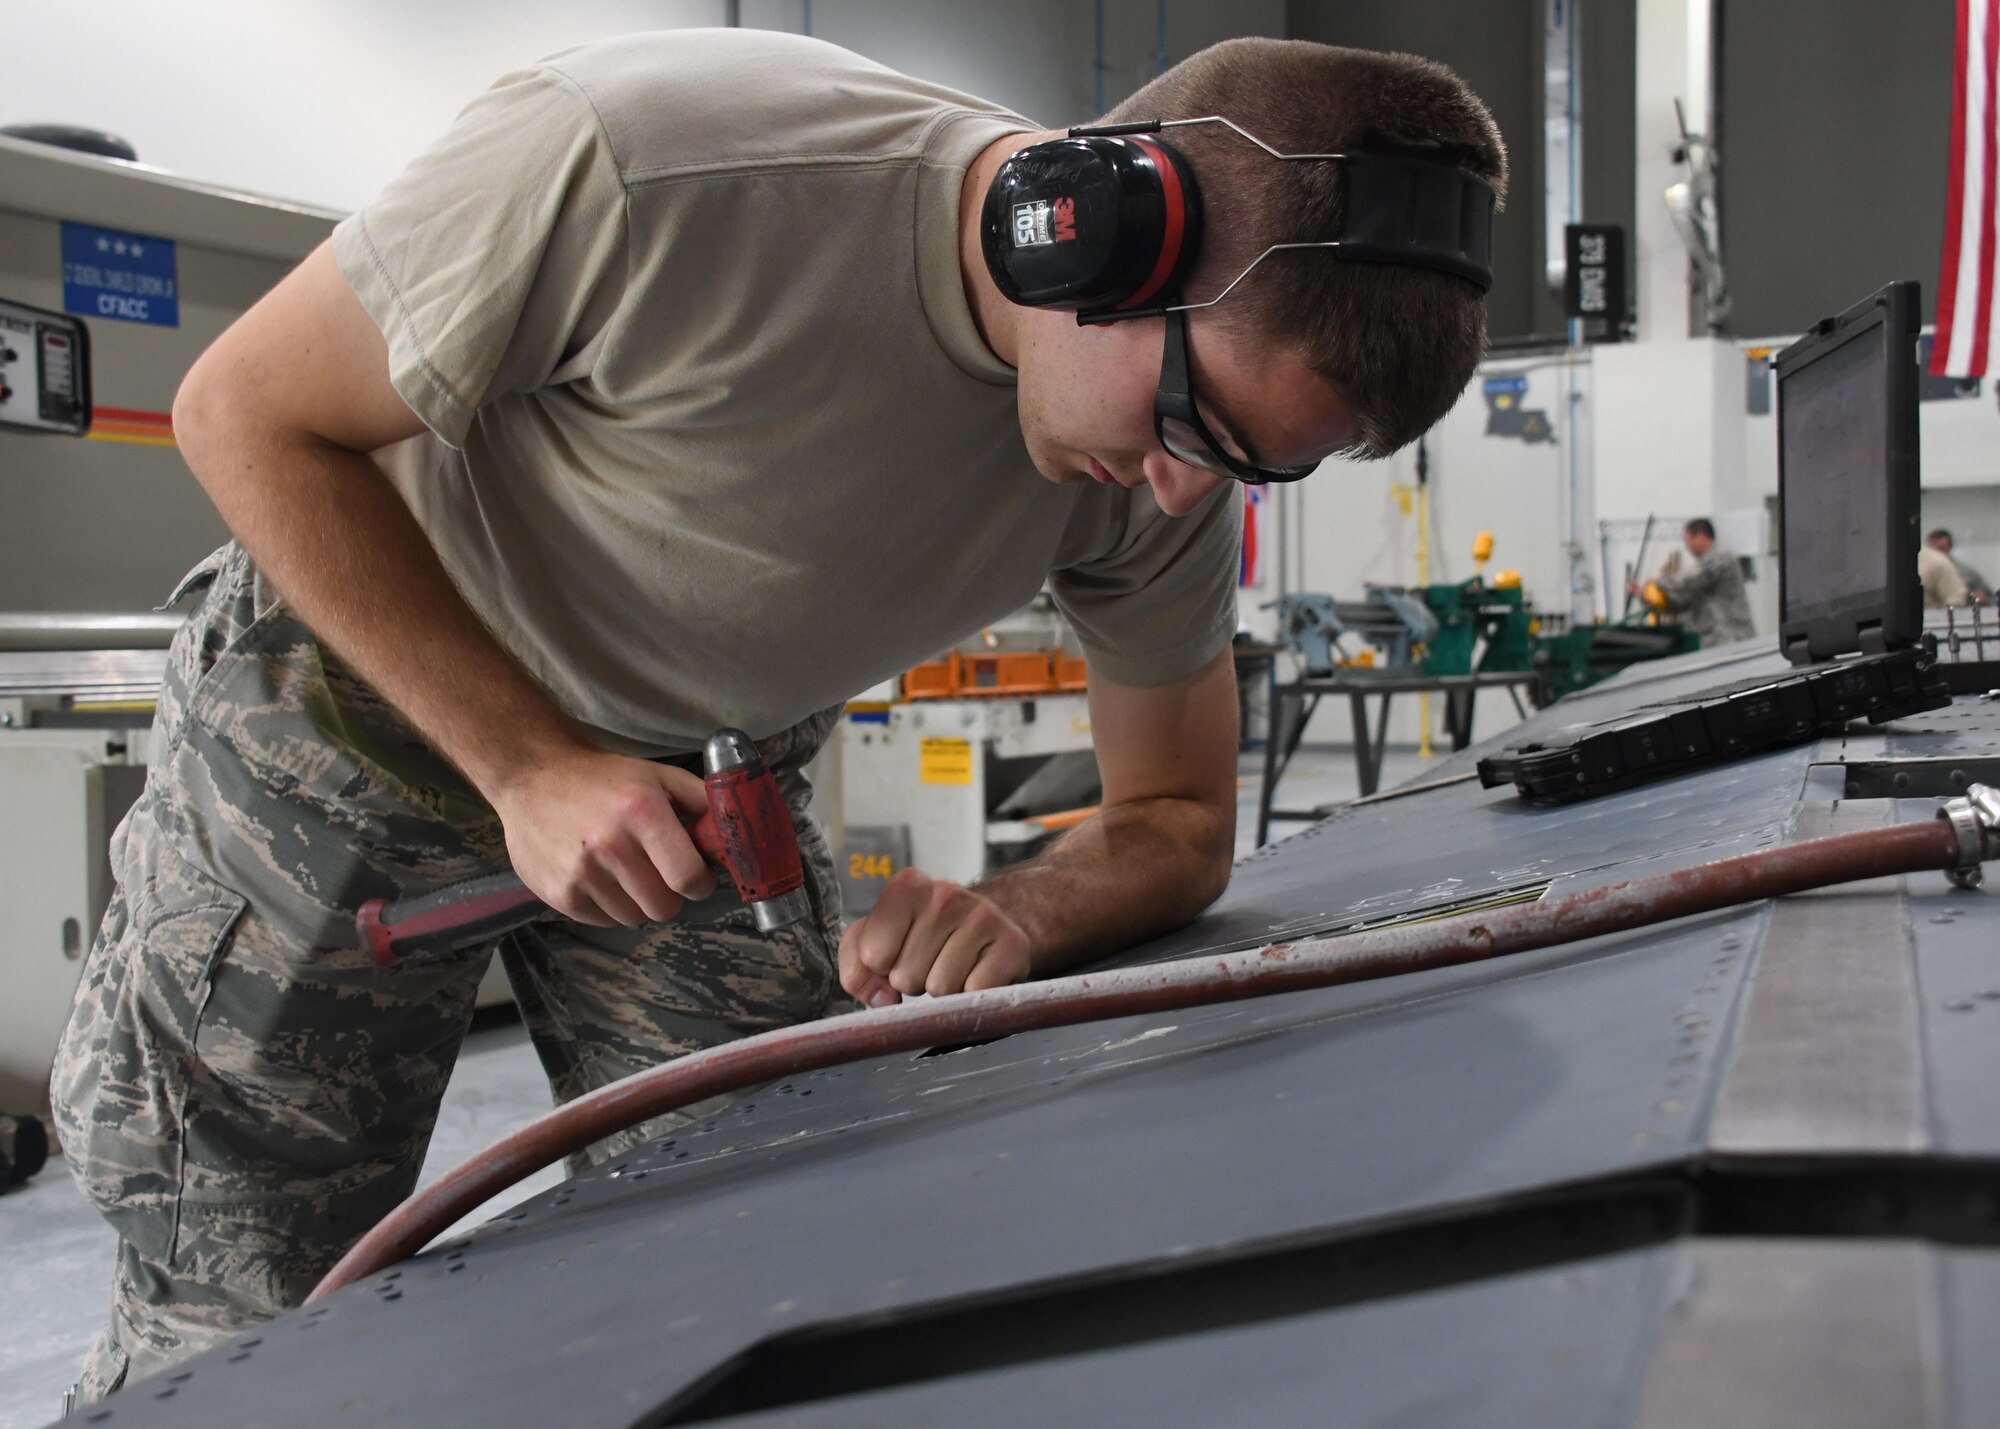 U.S. Air Force Airman 1st Class Mitchell Rogers, an aircraft structural maintenance journeyman with the 379th Expeditionary Maintenance Squadron Sheet Metal Shop, removes old rivets from an outbound flap for an aircraft at Al Udeid Air Base, Qatar, Feb. 16, 2017. A piece of metal was torn off of the flap during flight, and needed to be fixed. (U.S. Air Force photo by Senior Airman Miles Wilson)